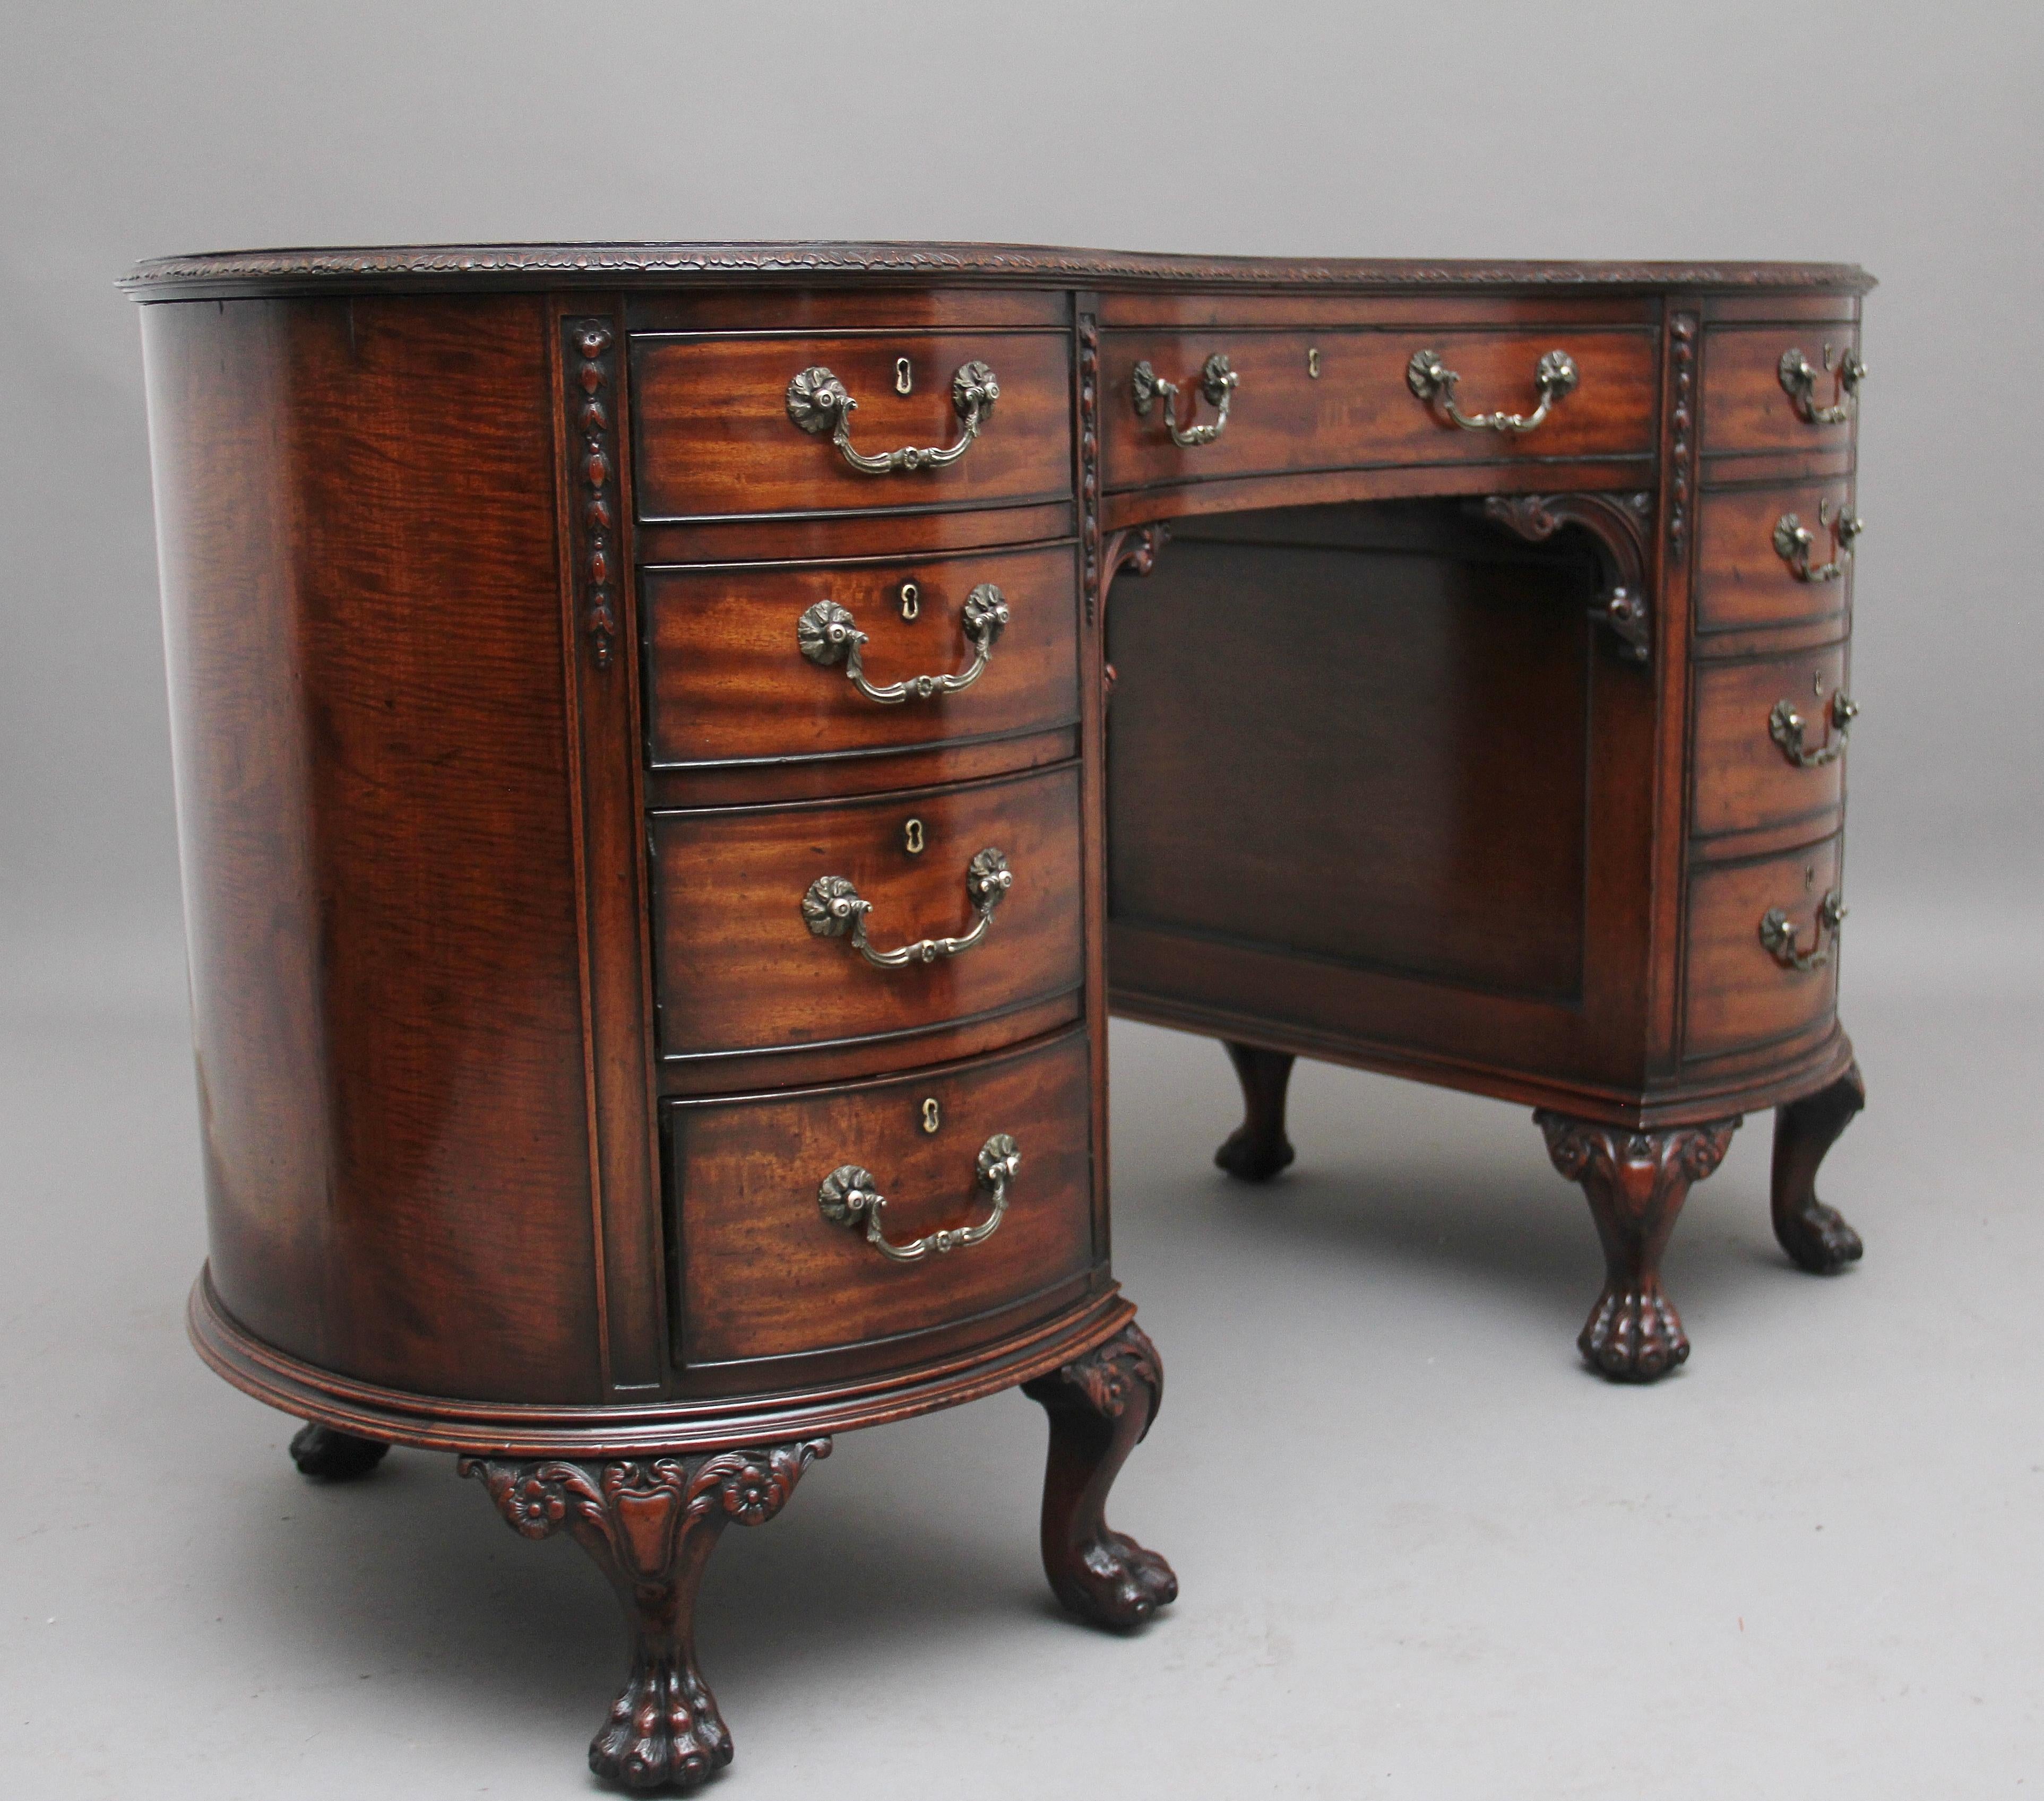 A superb quality early 20th century mahogany kidney shaped desk, the top having a green leather writing surface decorated with blind and gold tooling, lovely crisp carved and moulded edge above a selection of nine mahogany lined drawers with